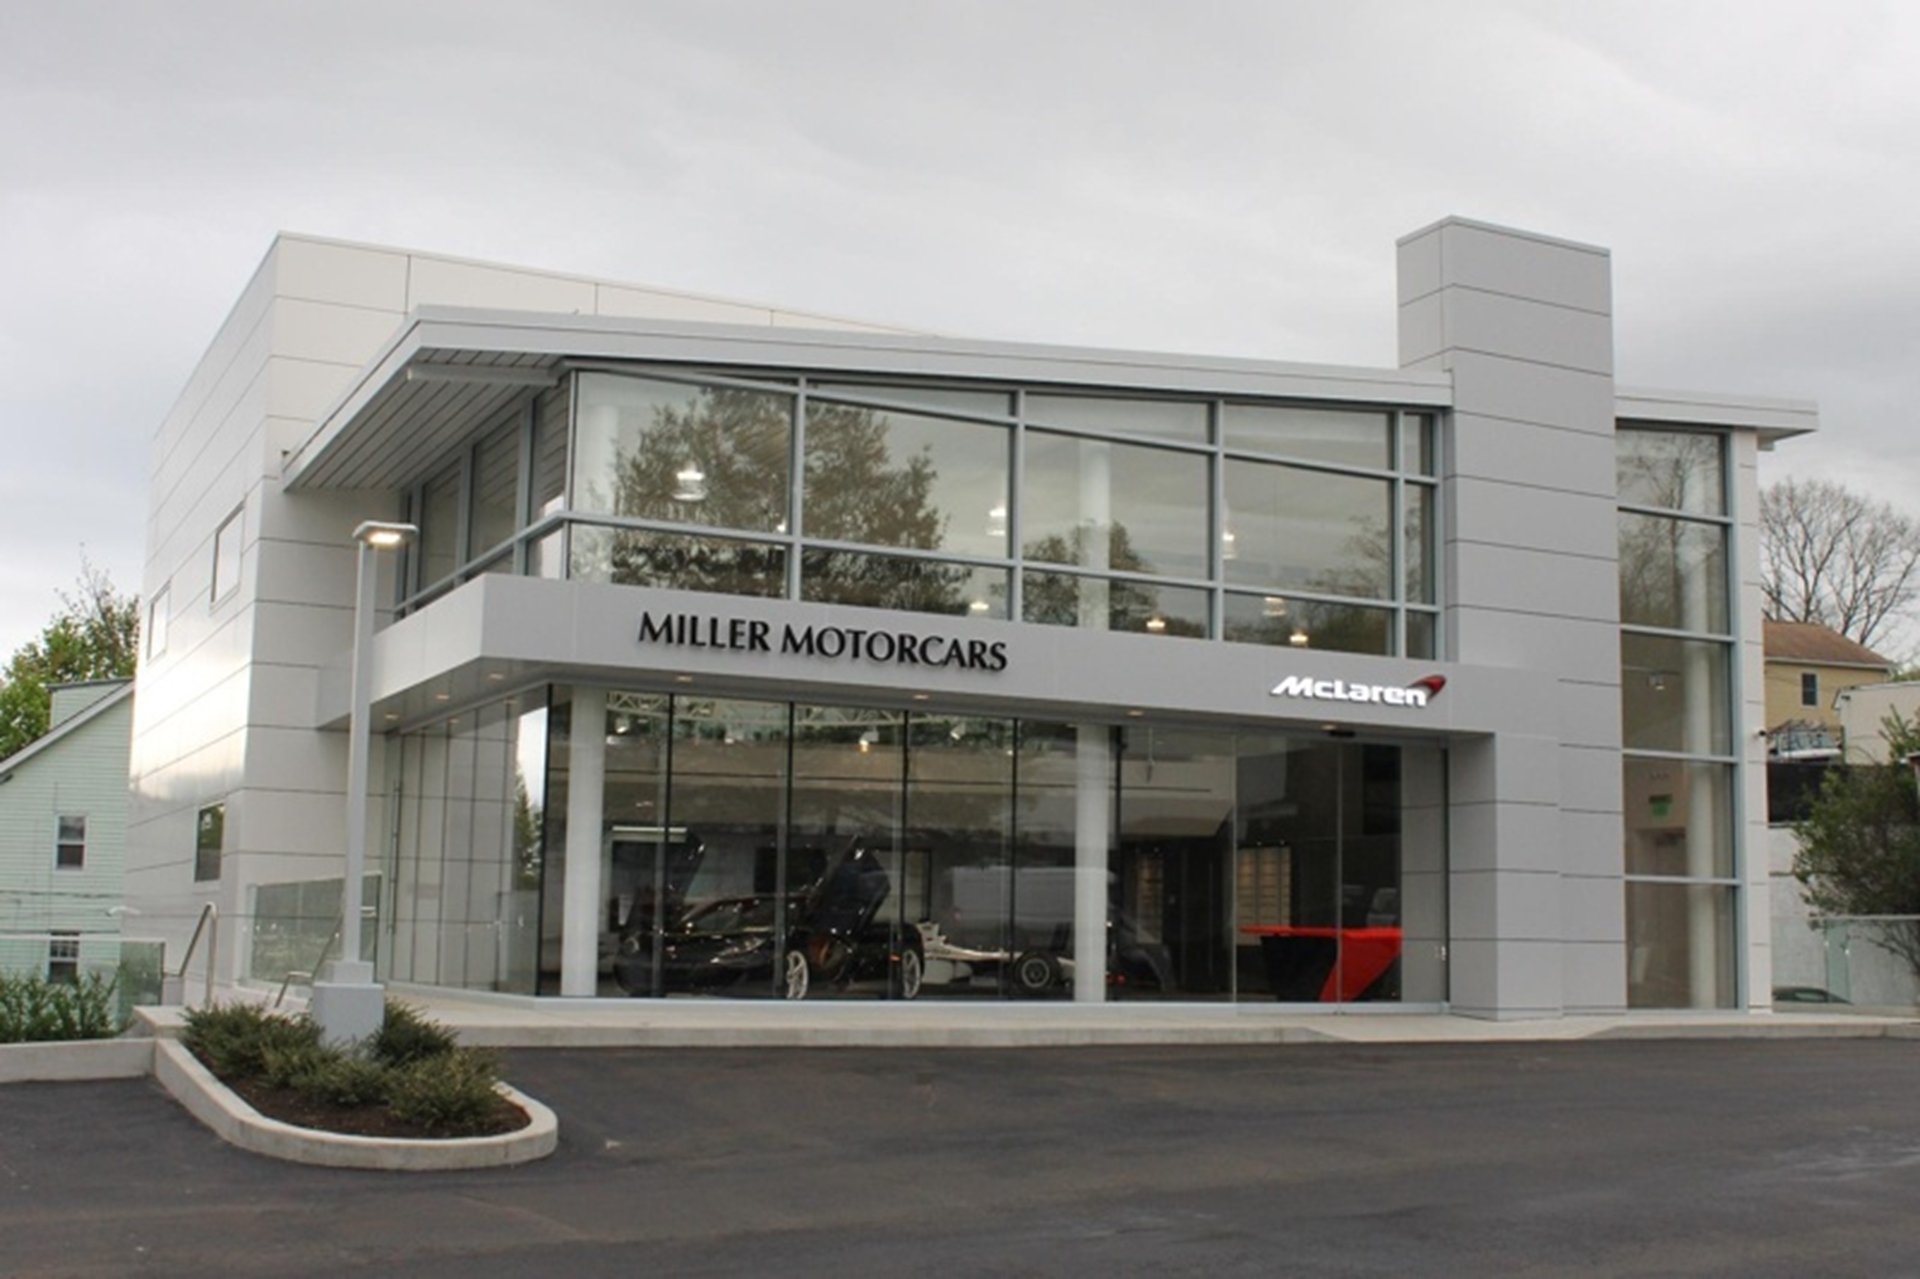 GRAND OPENING EVENT MARKS THE ARRIVAL OF McLAREN AUTOMOTIVE IN GREENWICH,